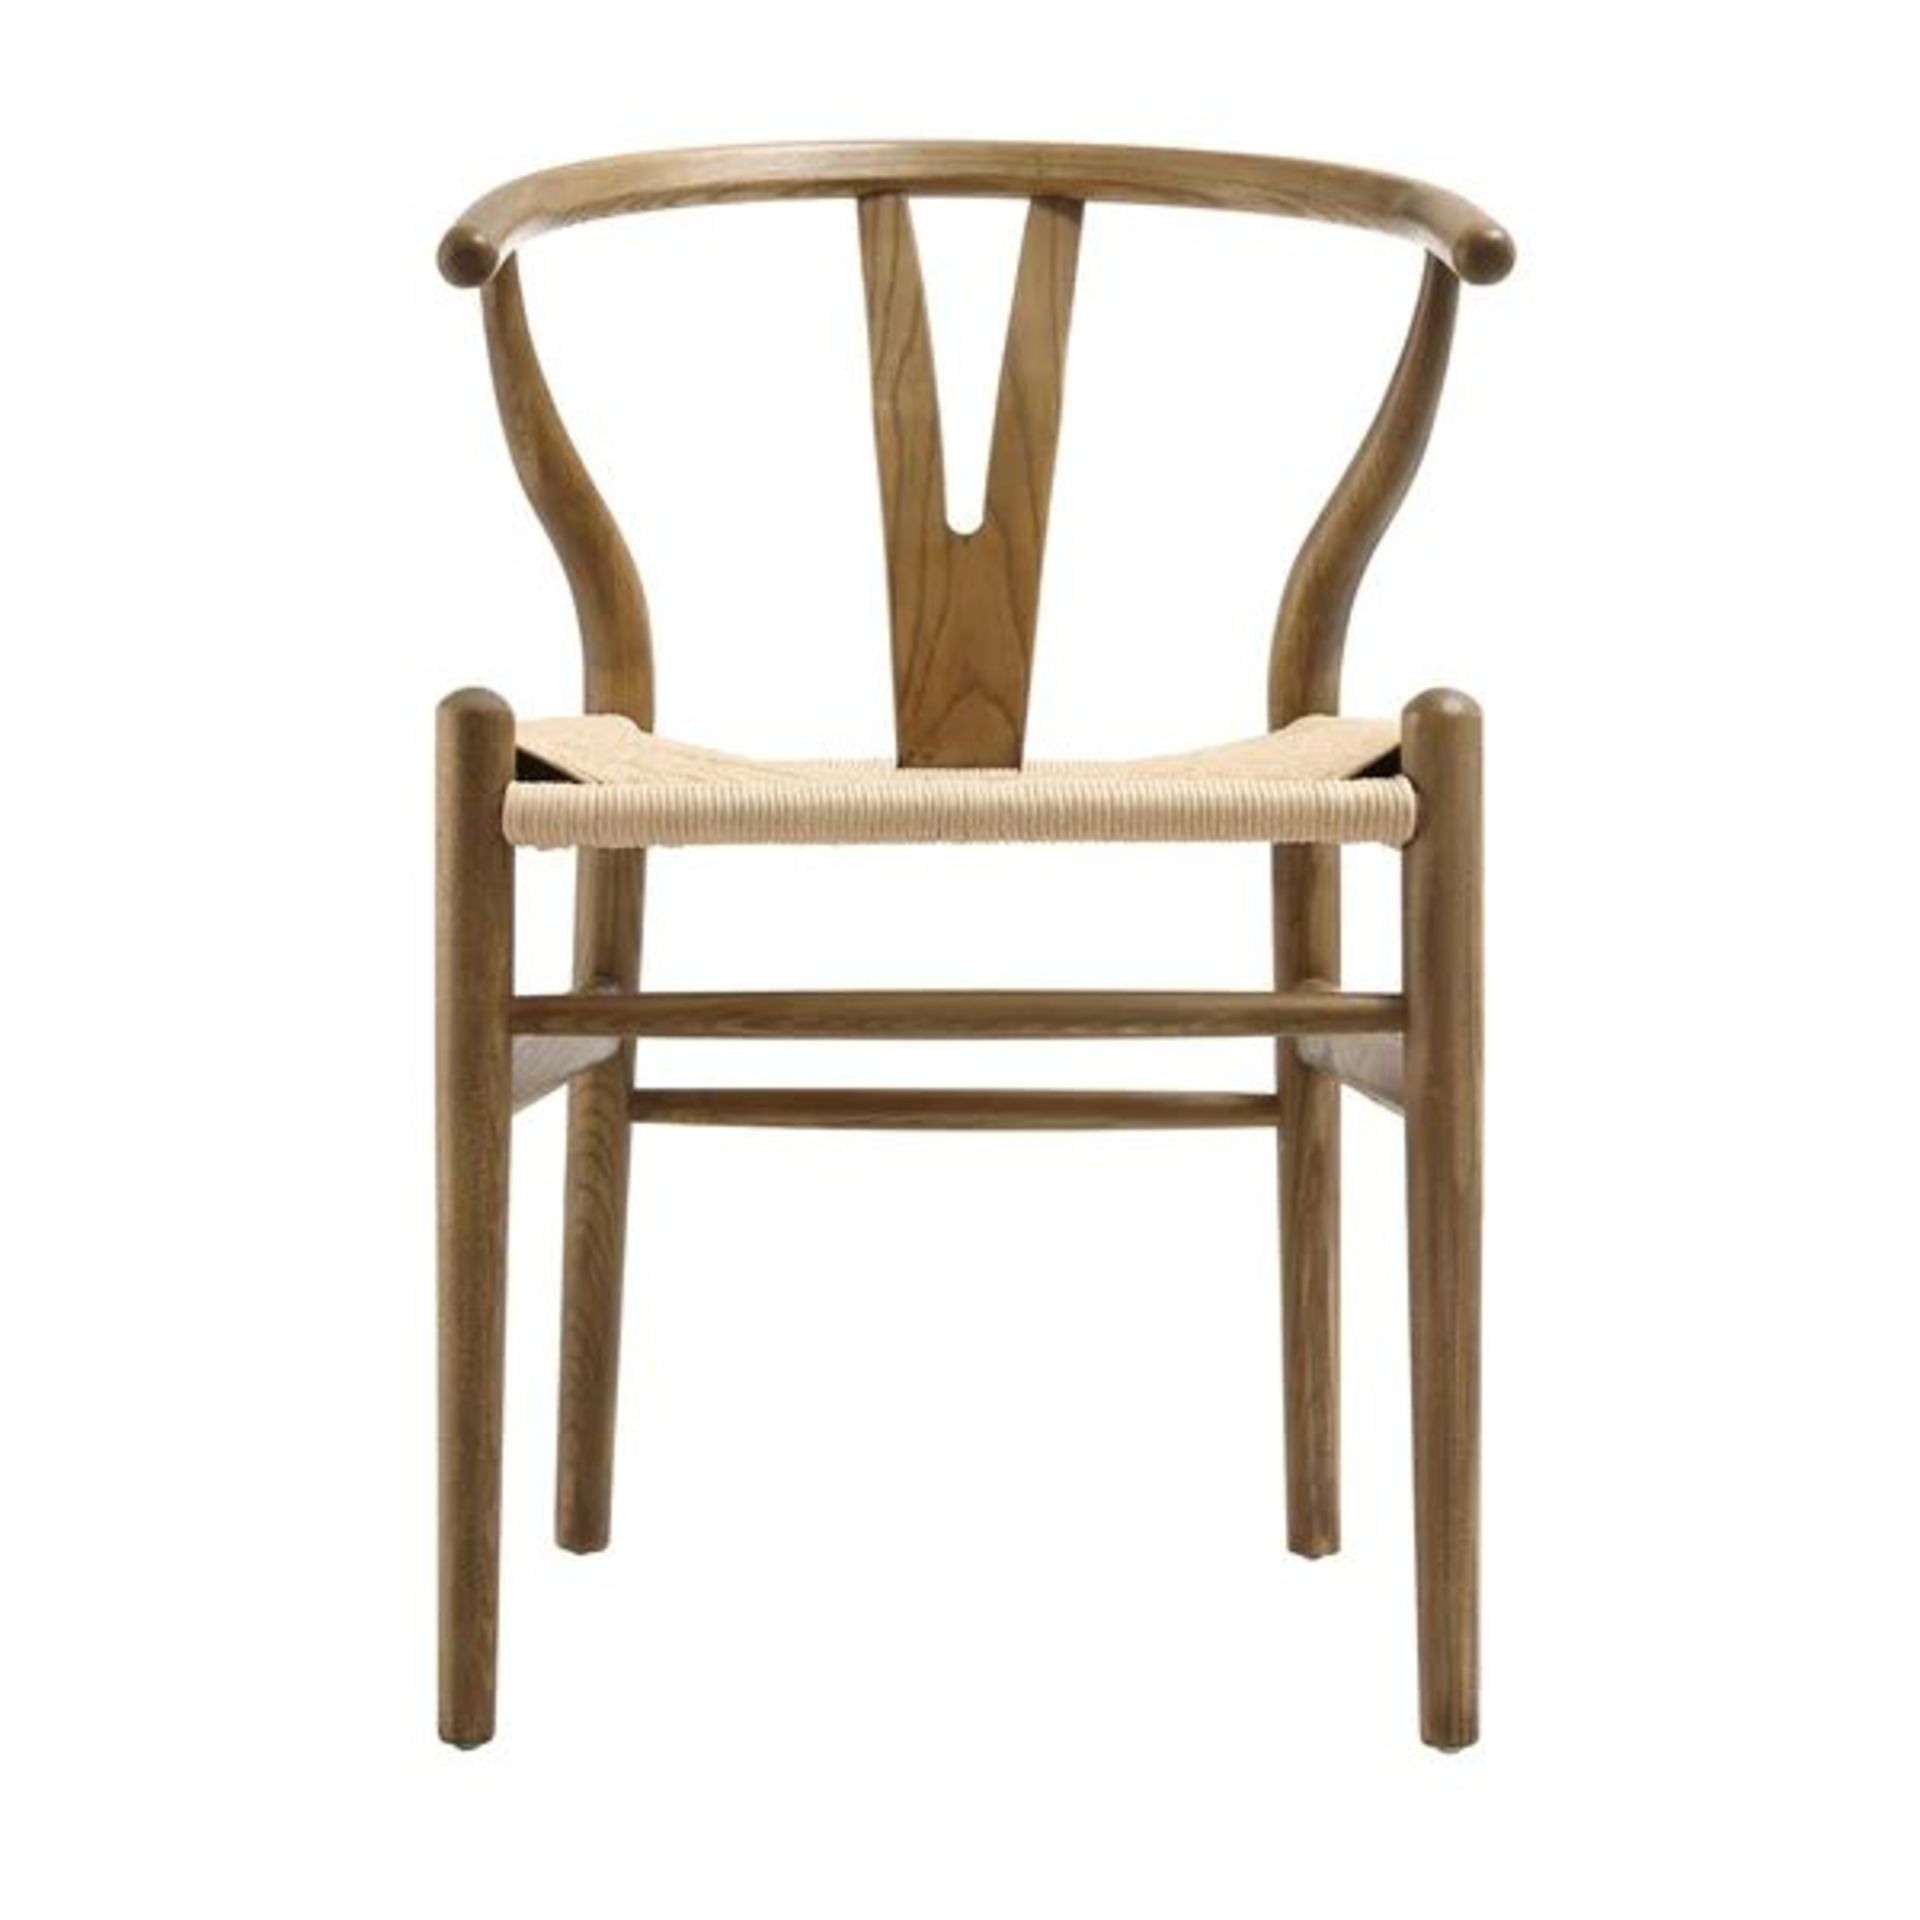 Hansel Wooden Natural Weave Wishbone Dining Chair, Light Walnut Colour Frame. - R19.6. RRP £189. - Image 2 of 2